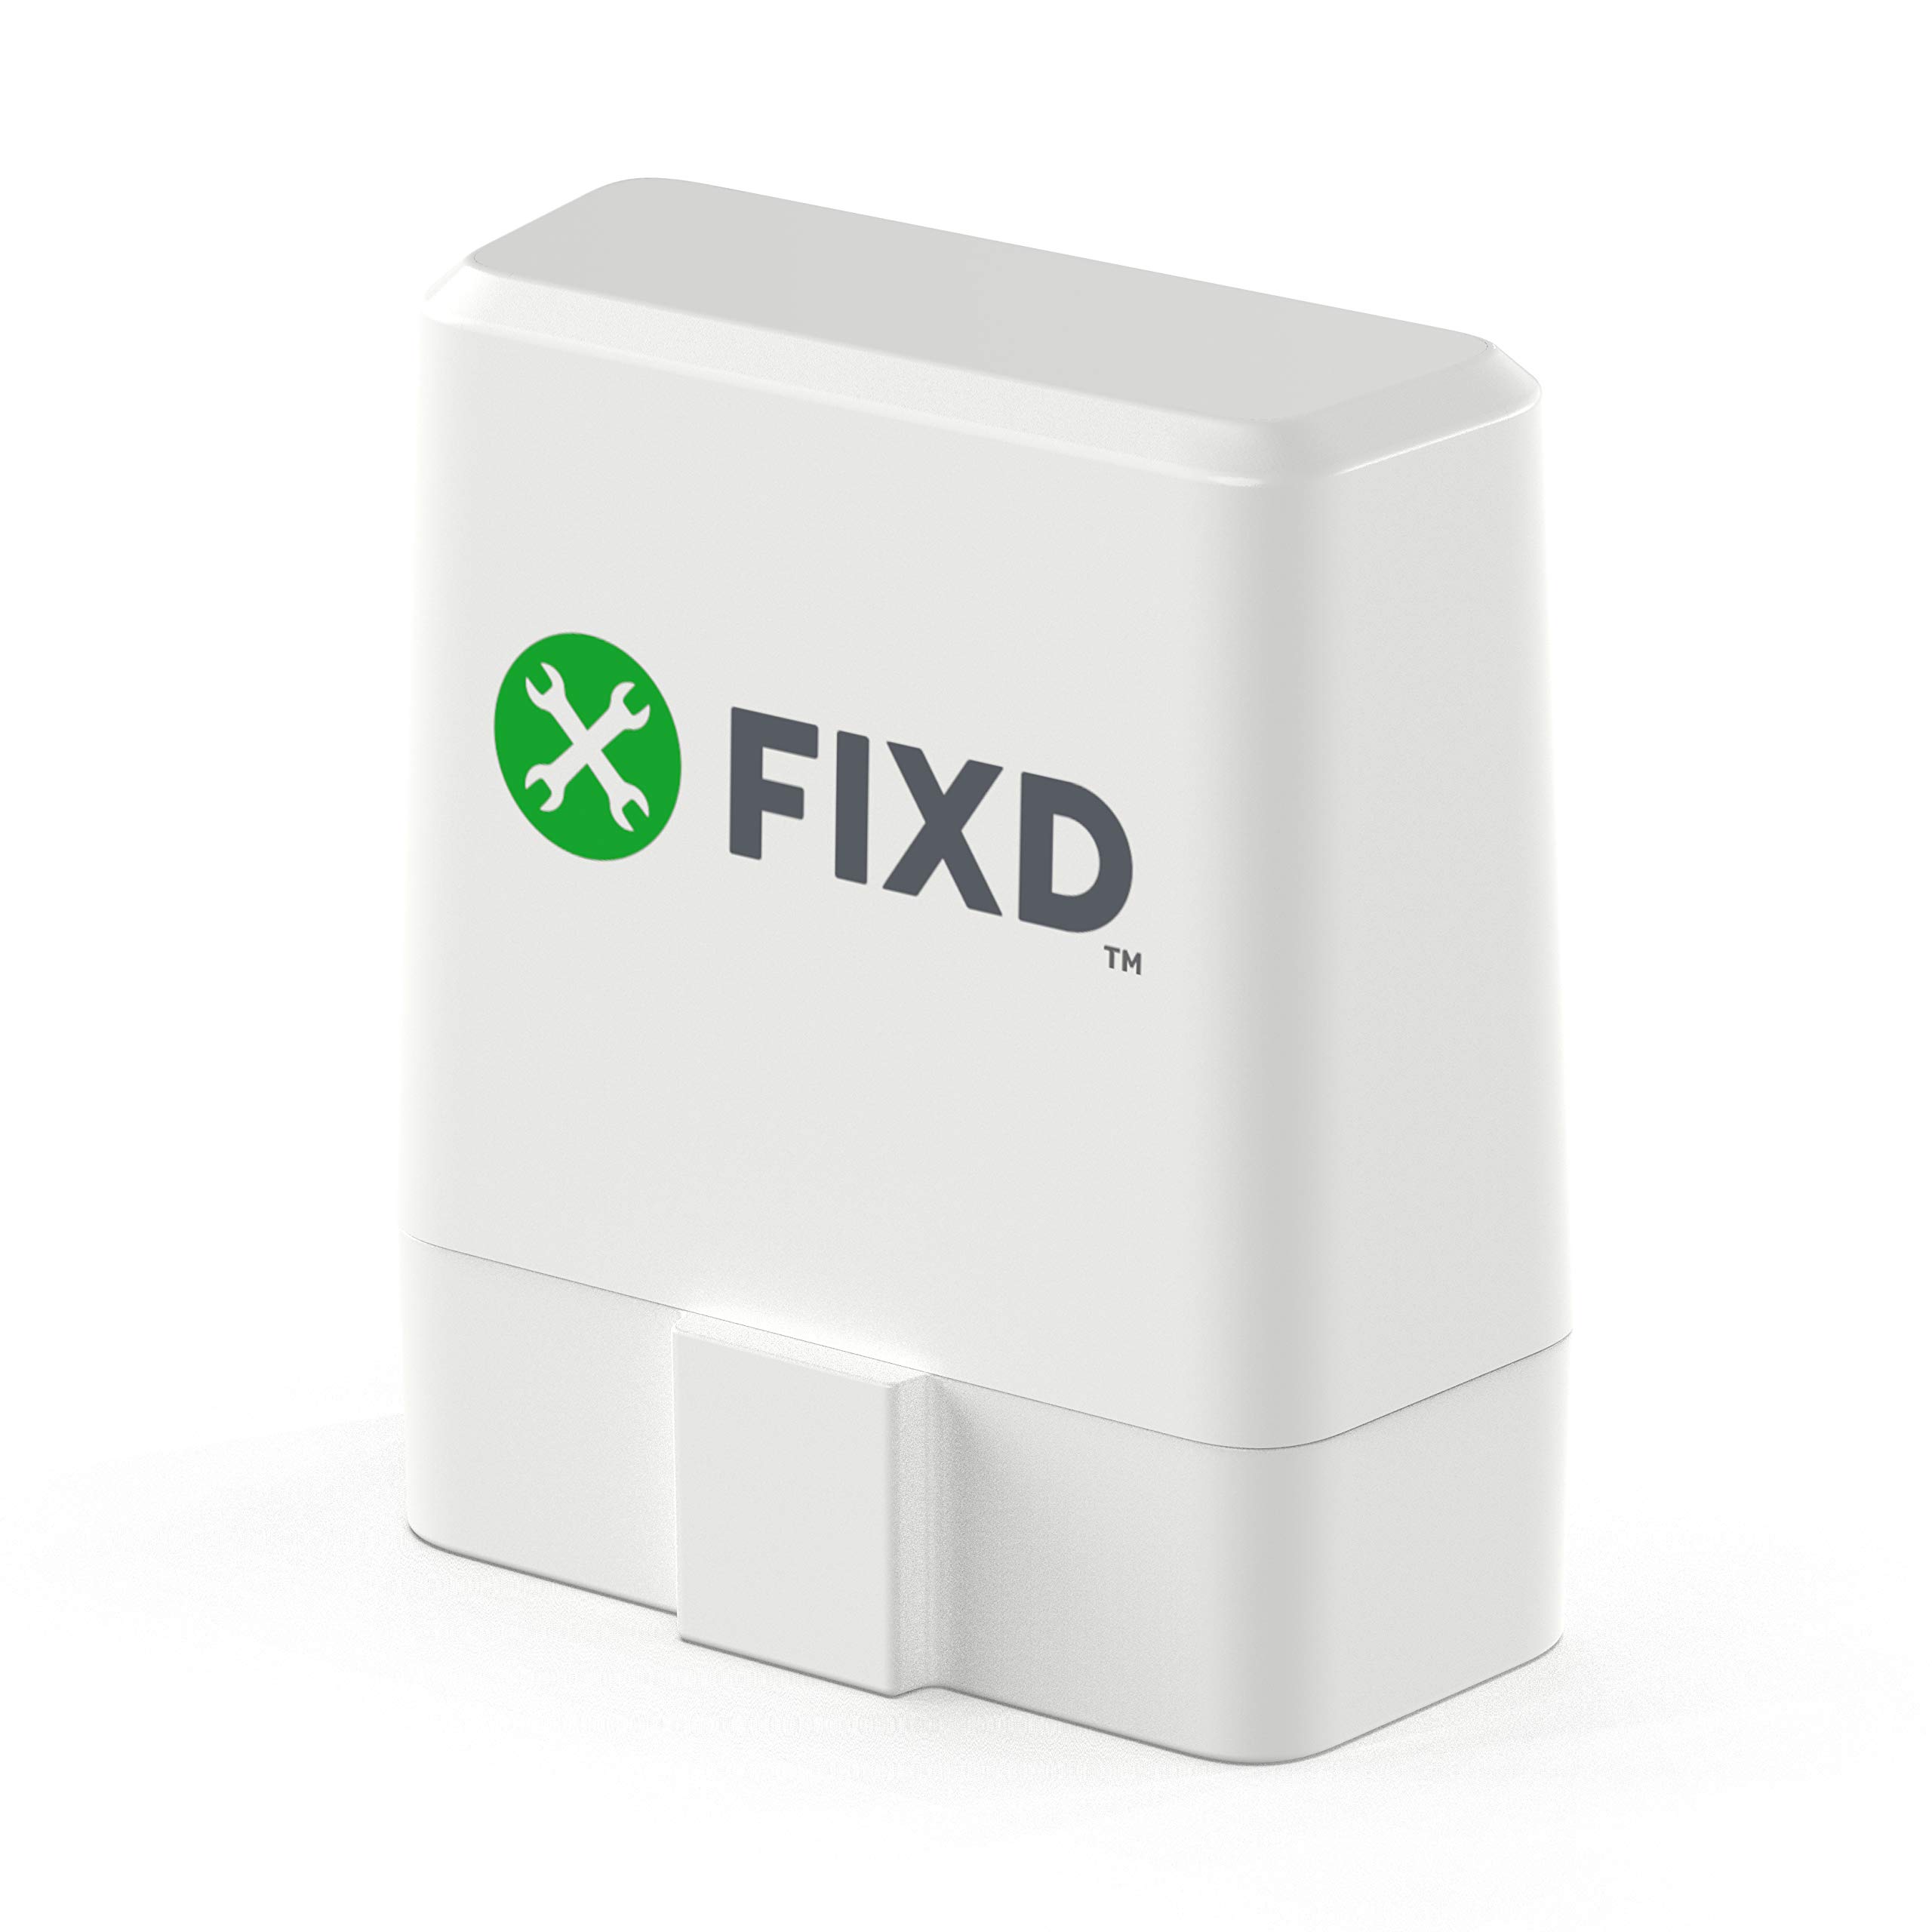 FIXD Bluetooth OBD2 Scanner for Car - Car Code Readers & Scan Tools for iPhone & Android - Wireless OBD2 Auto Diagnostic Tool to Check Engine & Fix All Cars & Vehicles ‘96 or Newer